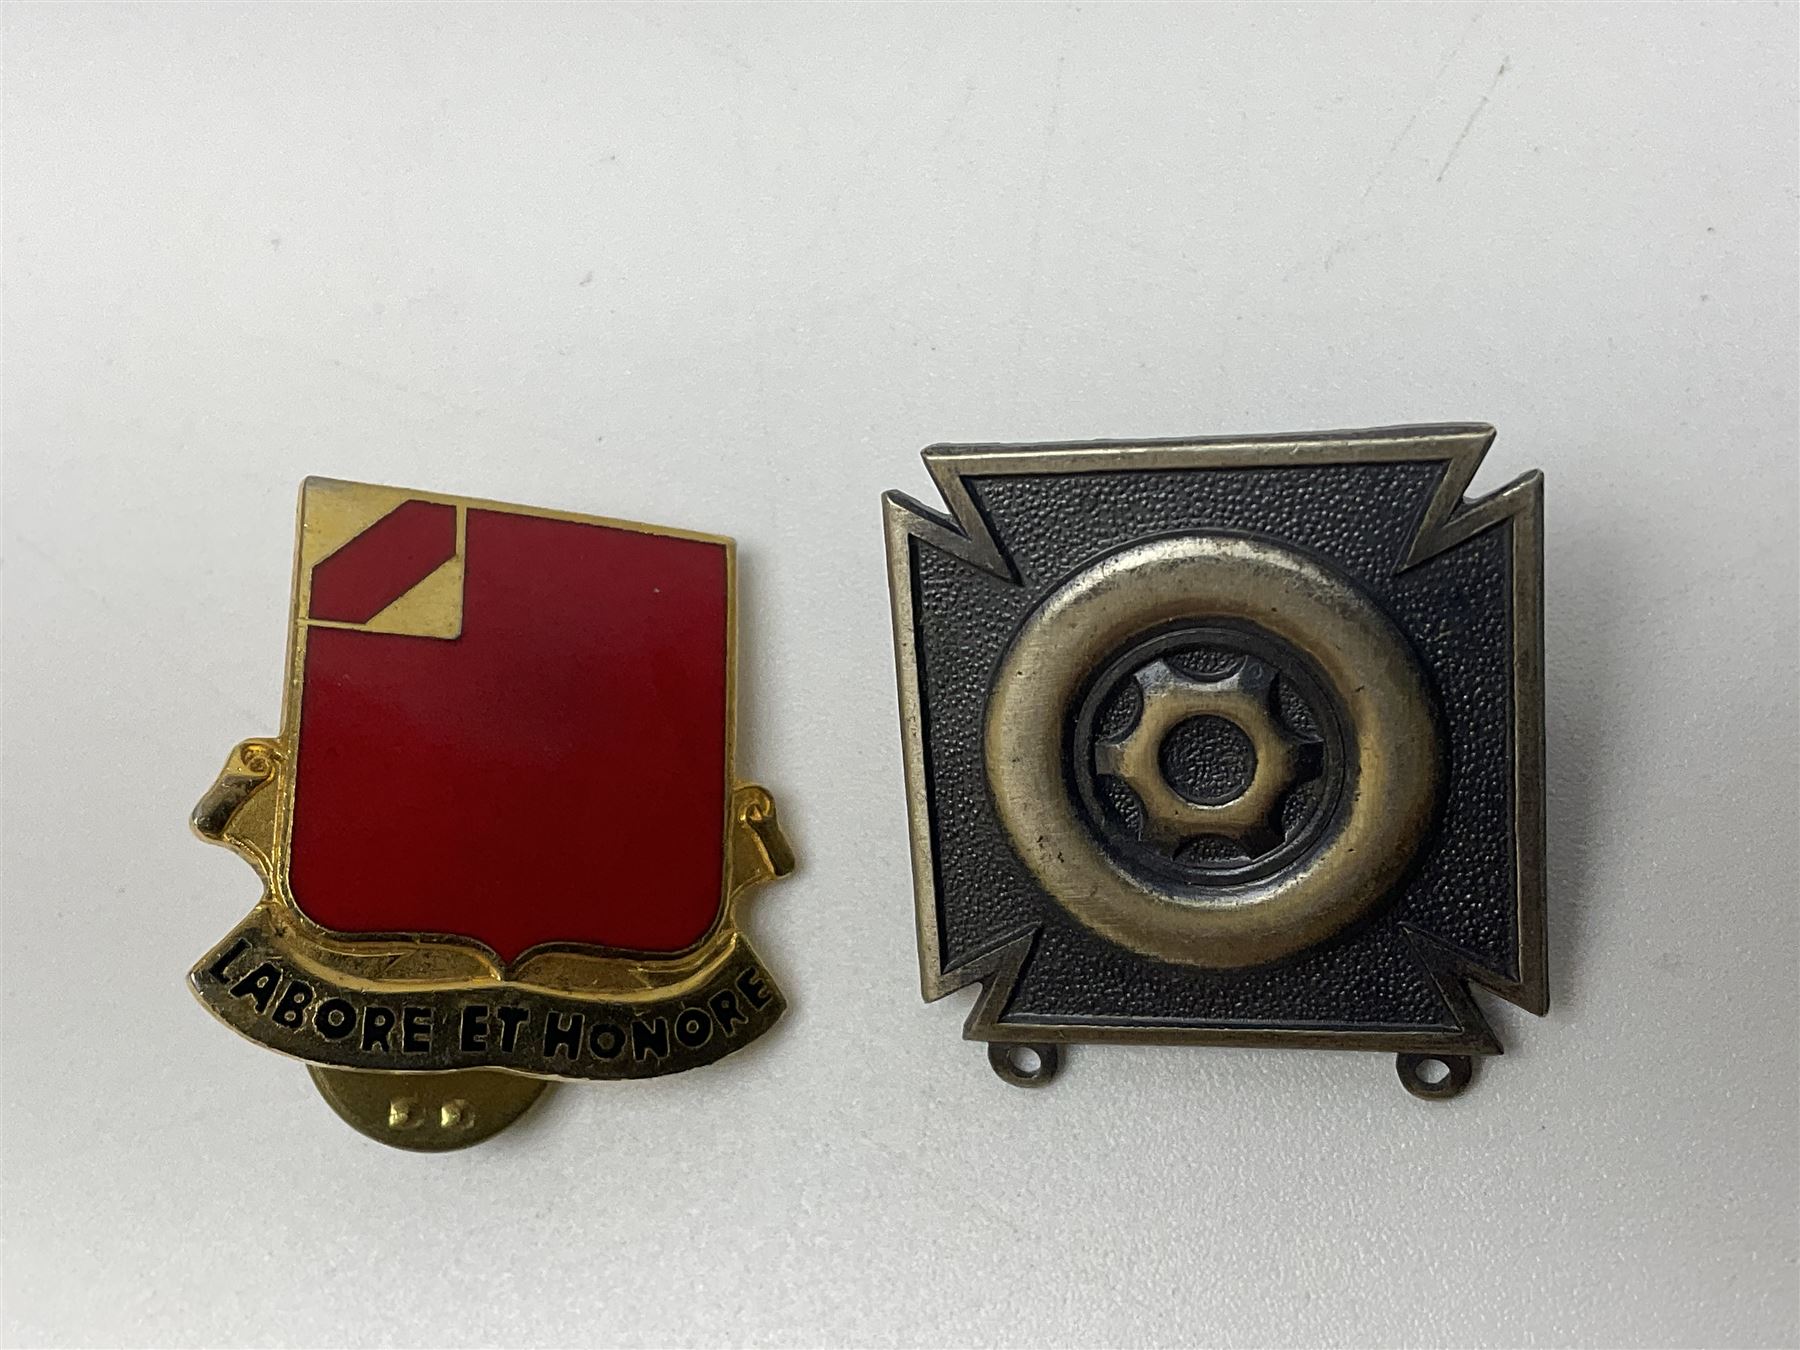 US Surgeons sterling silver wings; and quantity of other American metal and cloth badges - Image 11 of 48